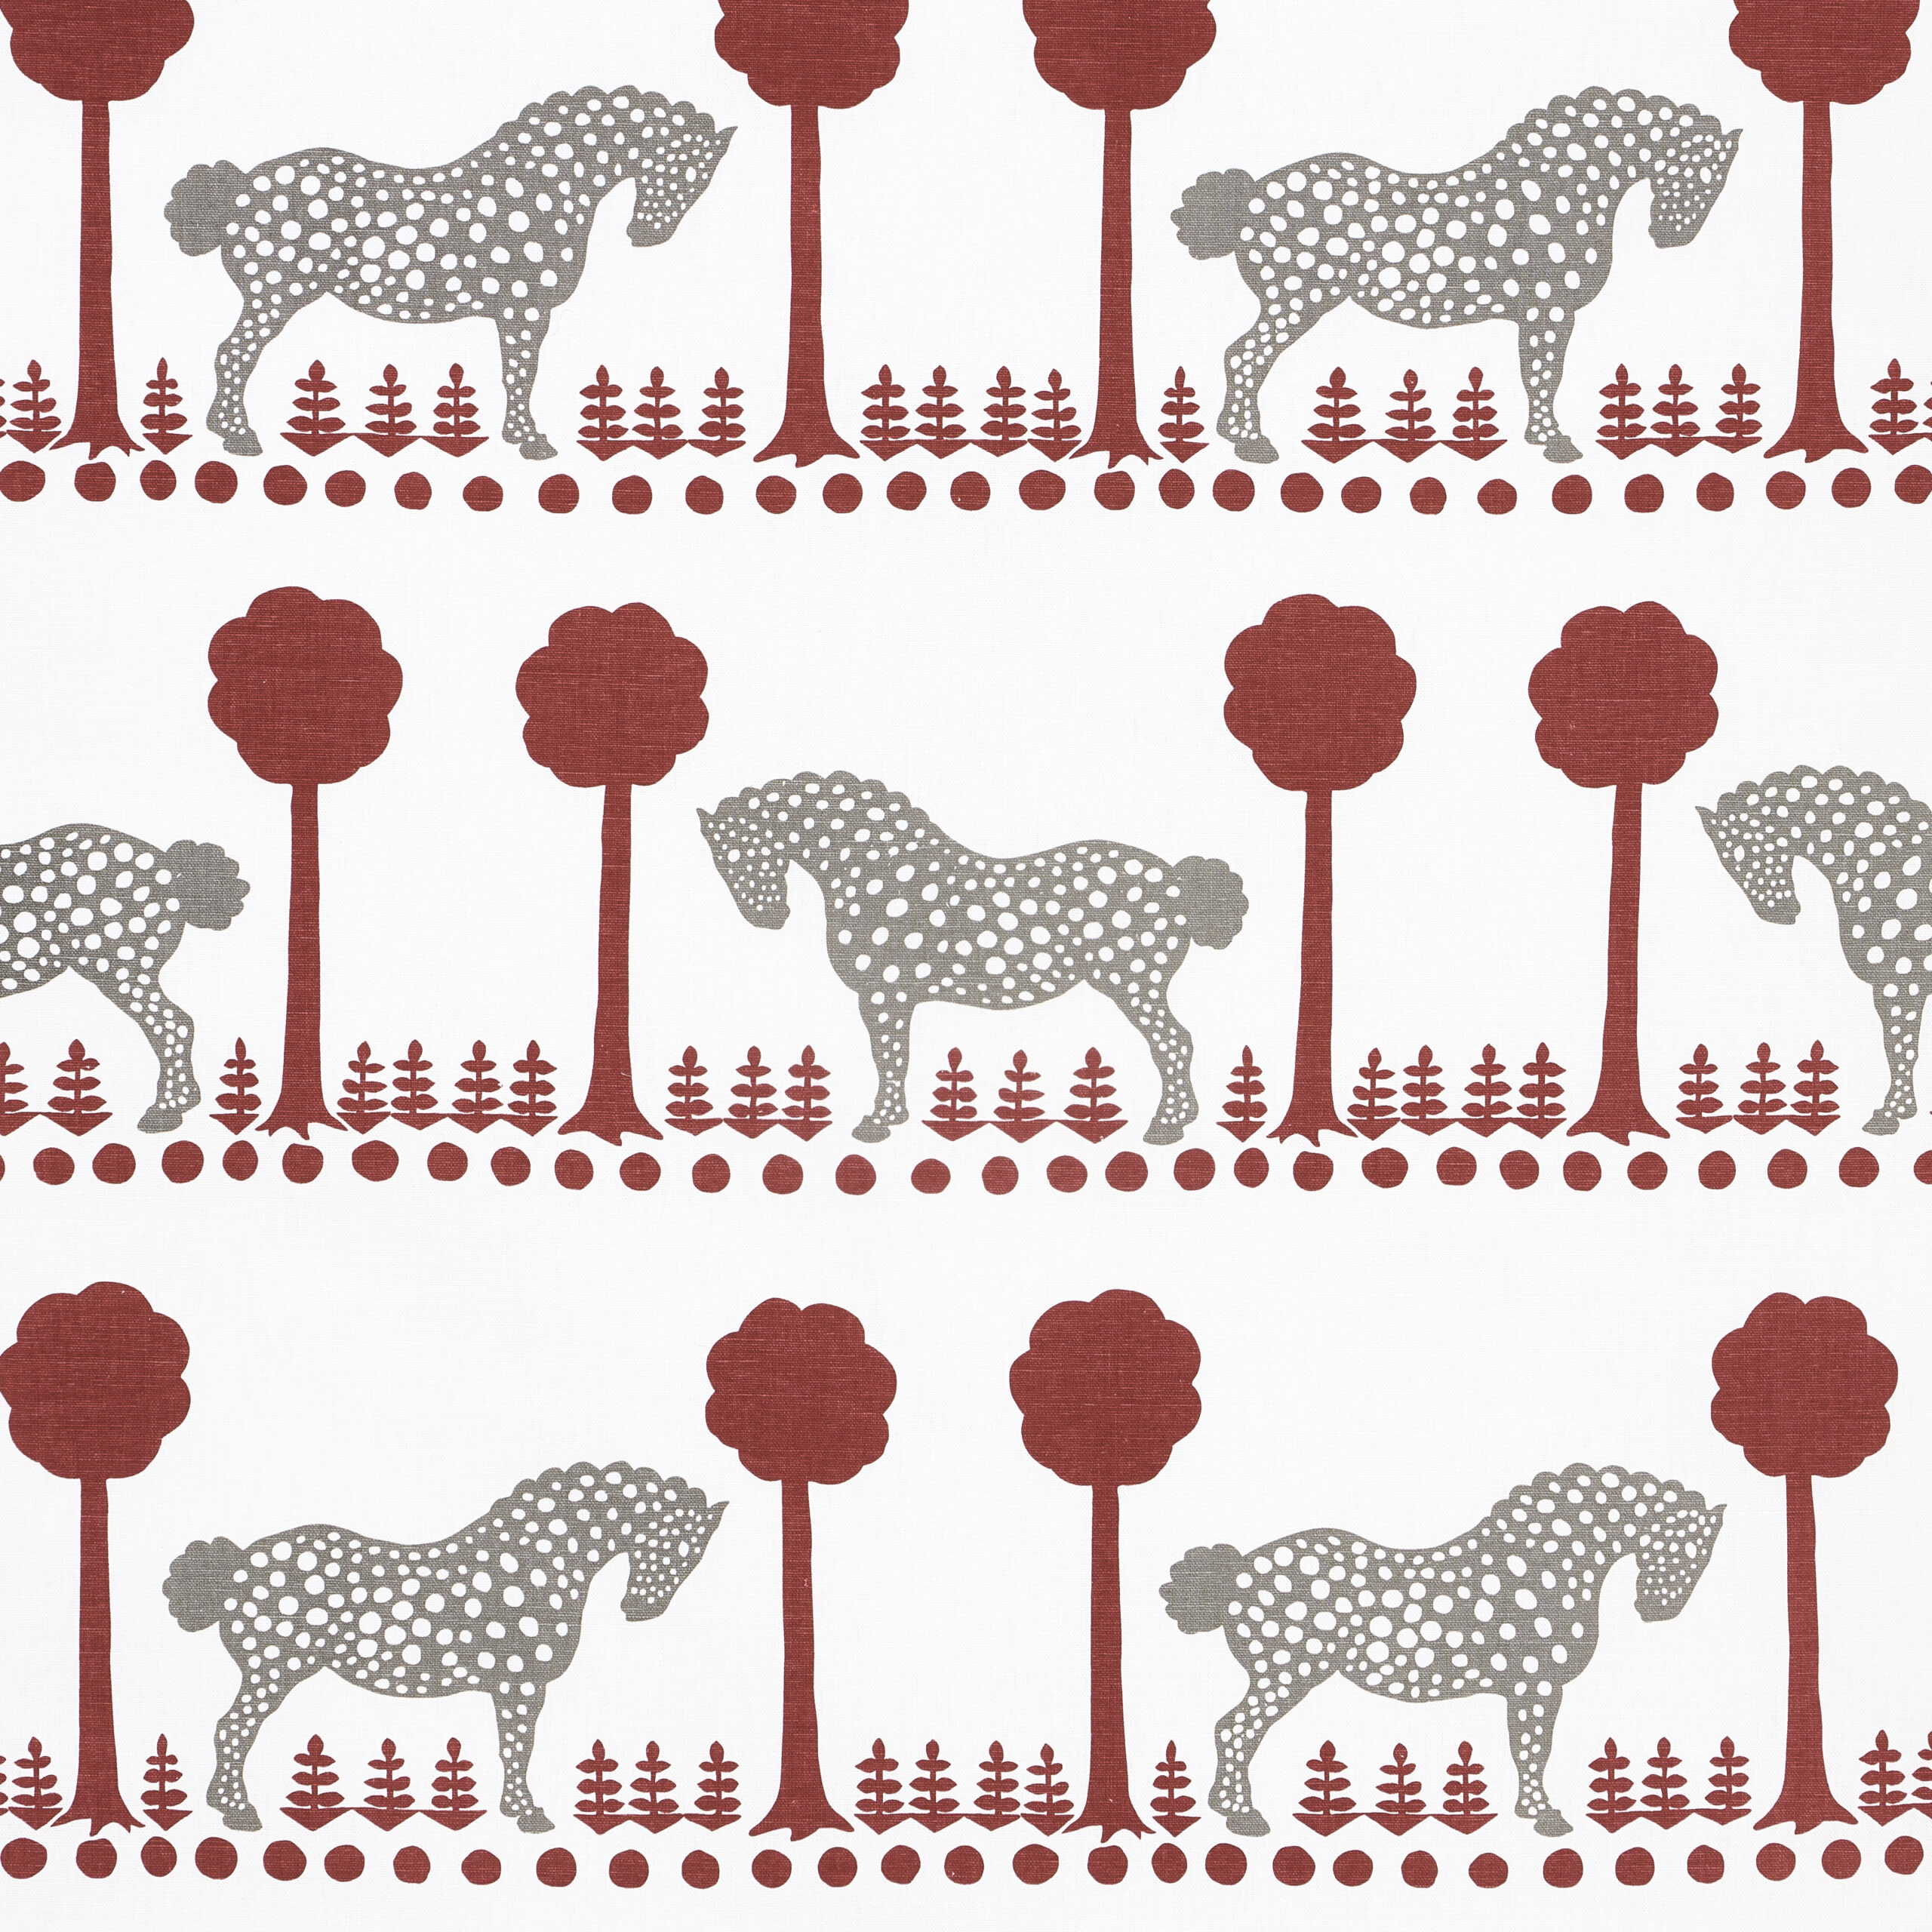 Schumacher Polka Dot Pony Fabric in Red, from the Folly Cove collection